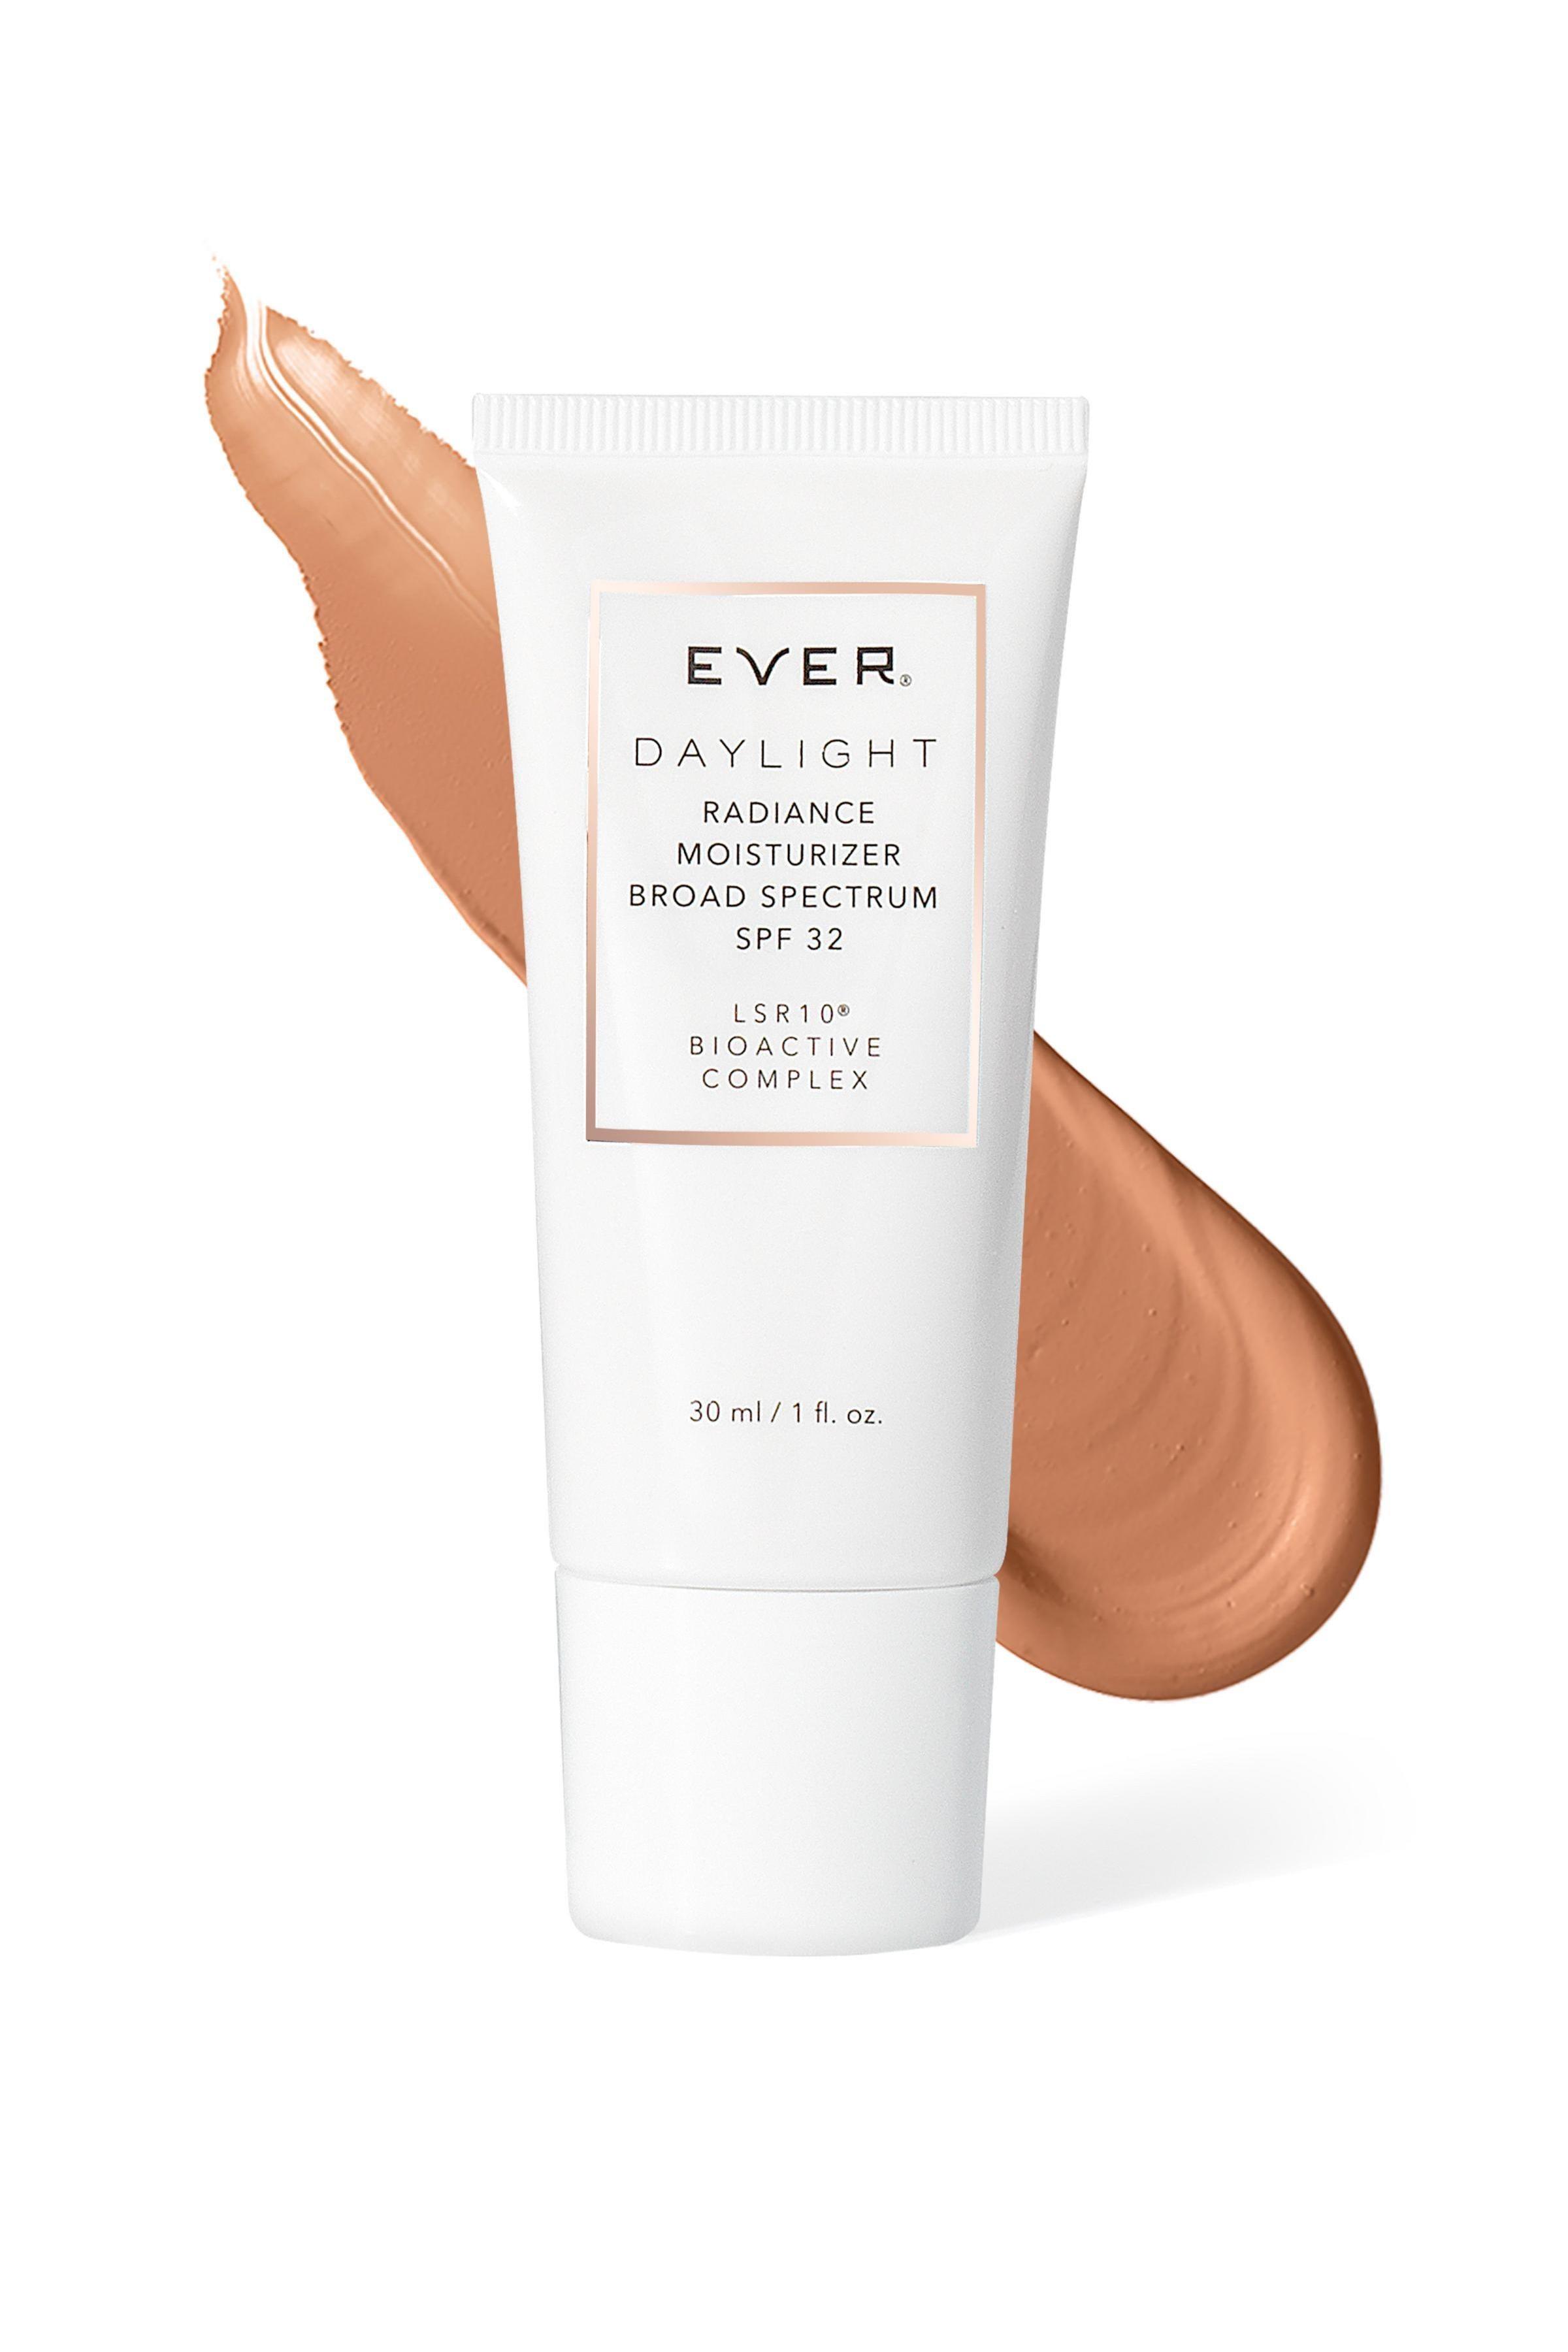 DAYLIGHT Radiance Tinted Moisturizer Broad Spectrum Sunscreen SPF 32 with LSR10® - EVER